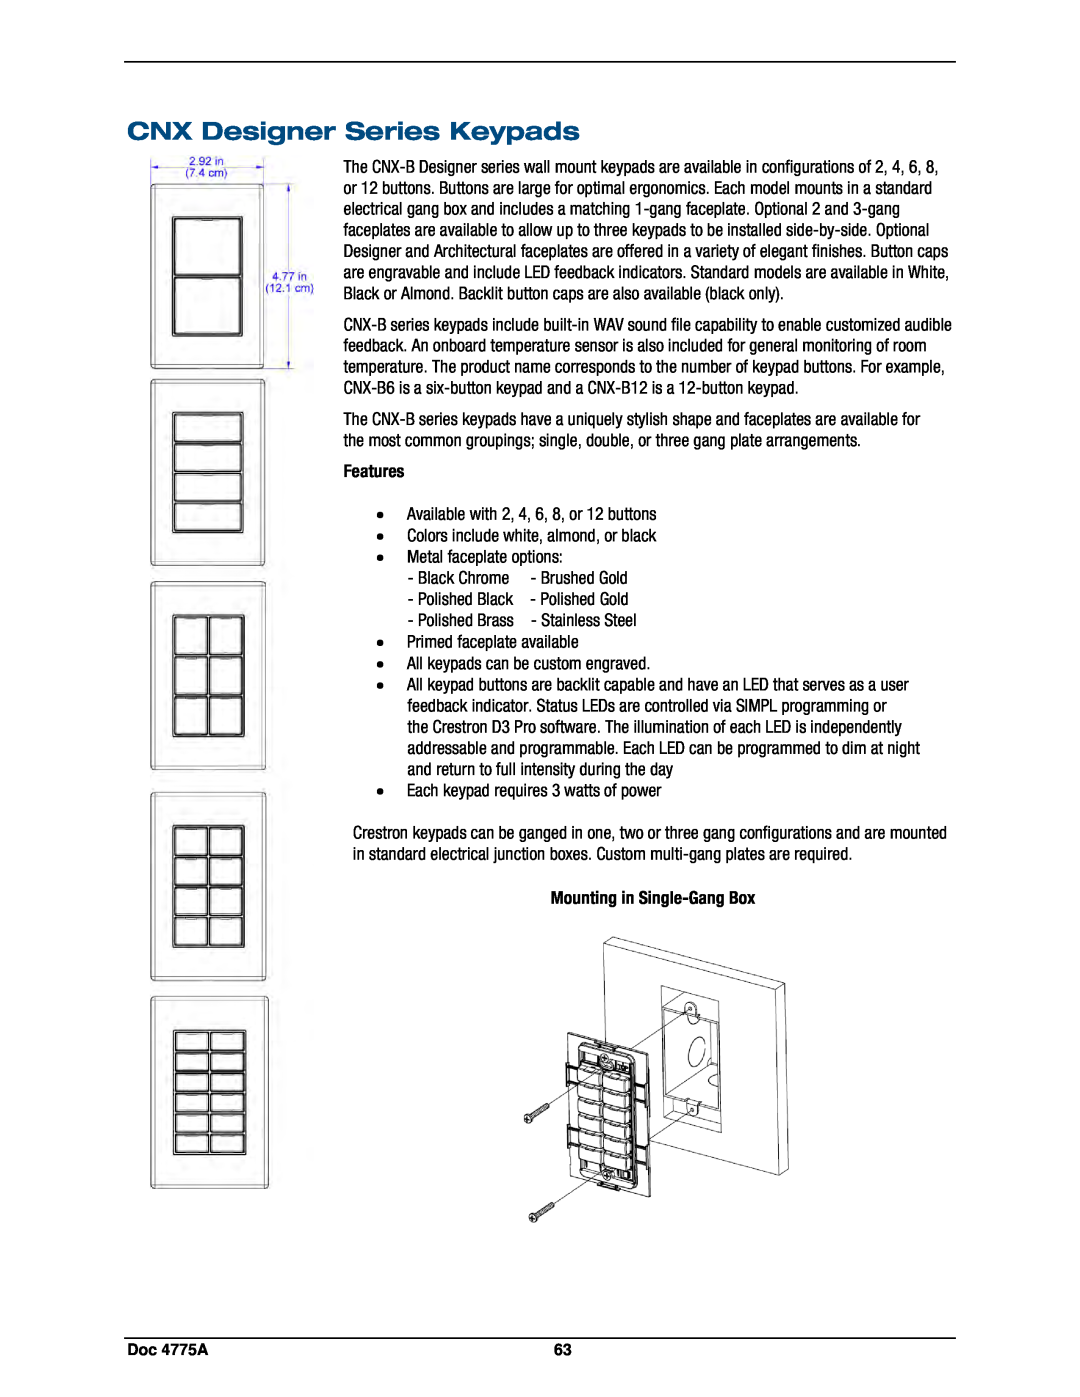 Crestron electronic GLPS-SW, IPAC-GL1 manual CNX Designer Series Keypads, Mounting in Single-GangBox, Features, Doc 4775A 